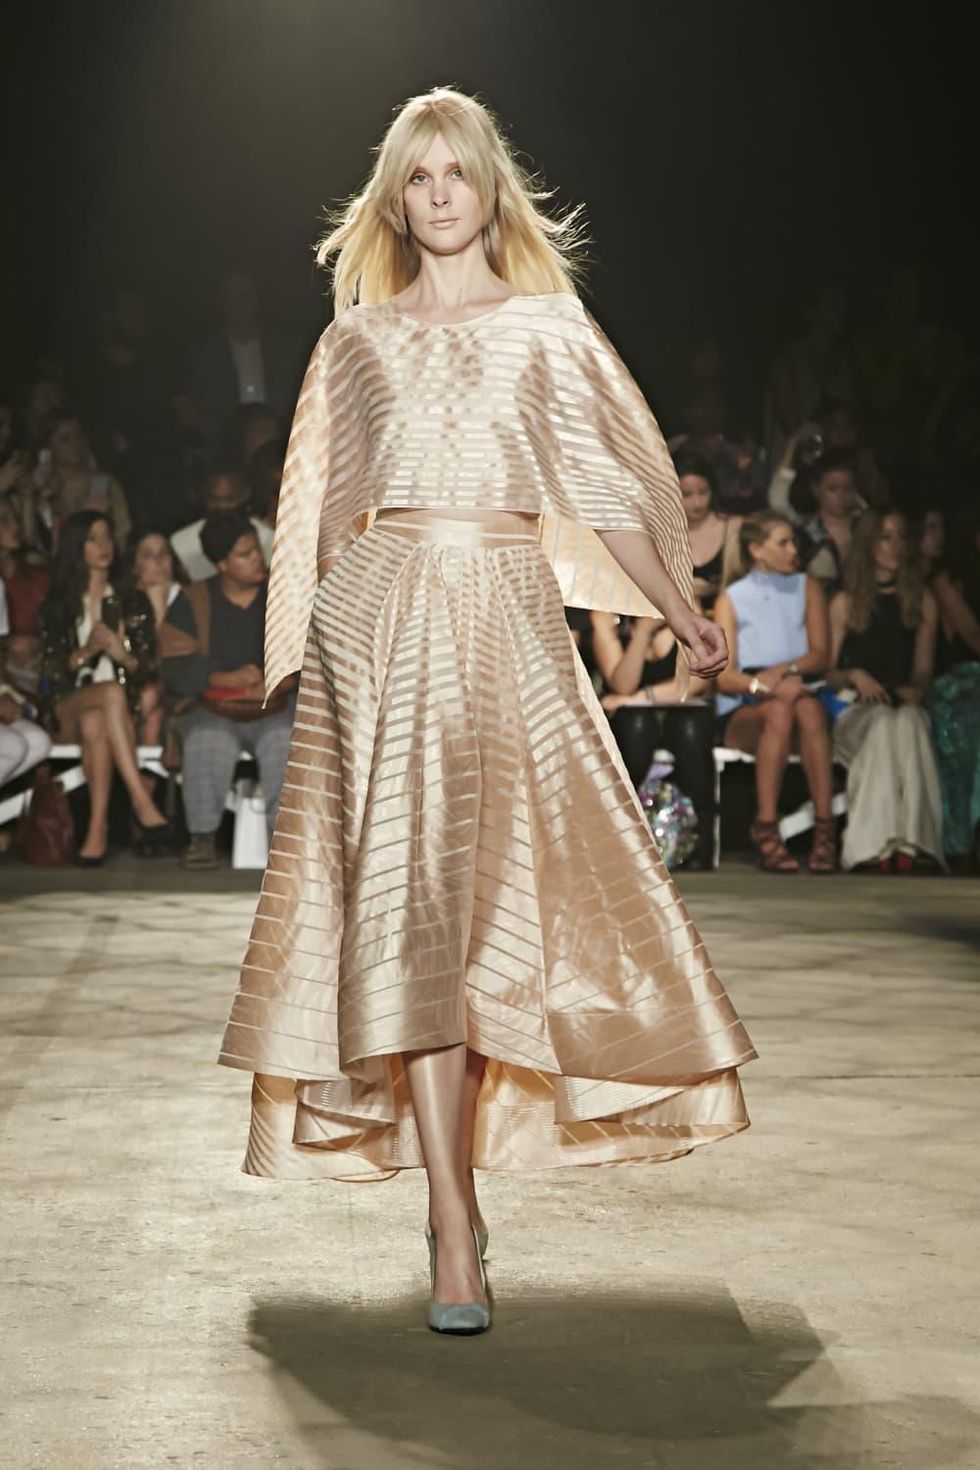 Christian Siriano SS16 collection